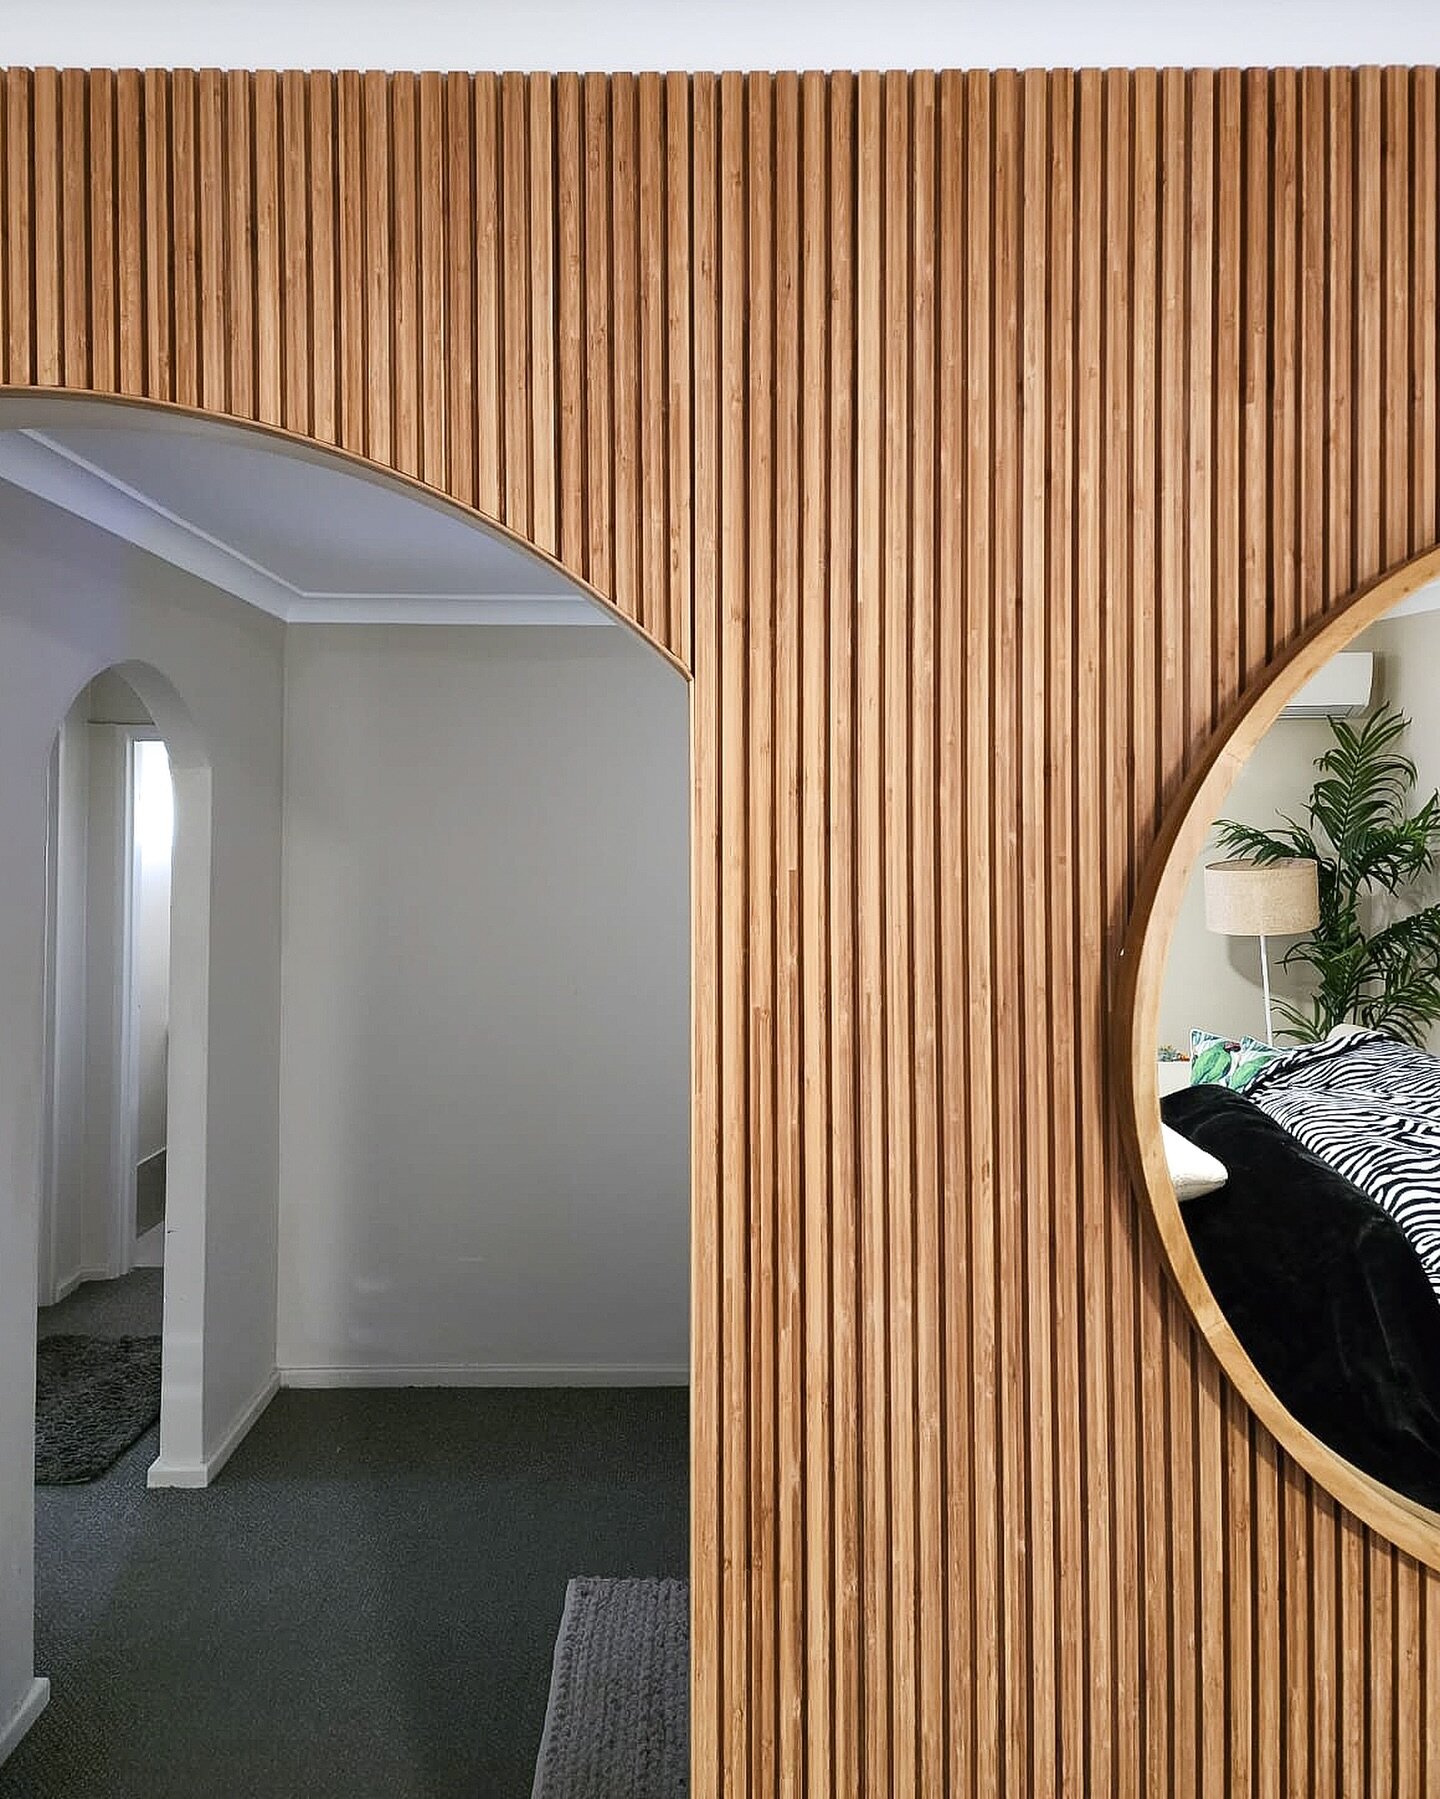 The only thing better than beautiful, natural bamboo panelling..? Arches 😍

Profile: Linear6
Colour: Natural
Installer: @kayudesignco